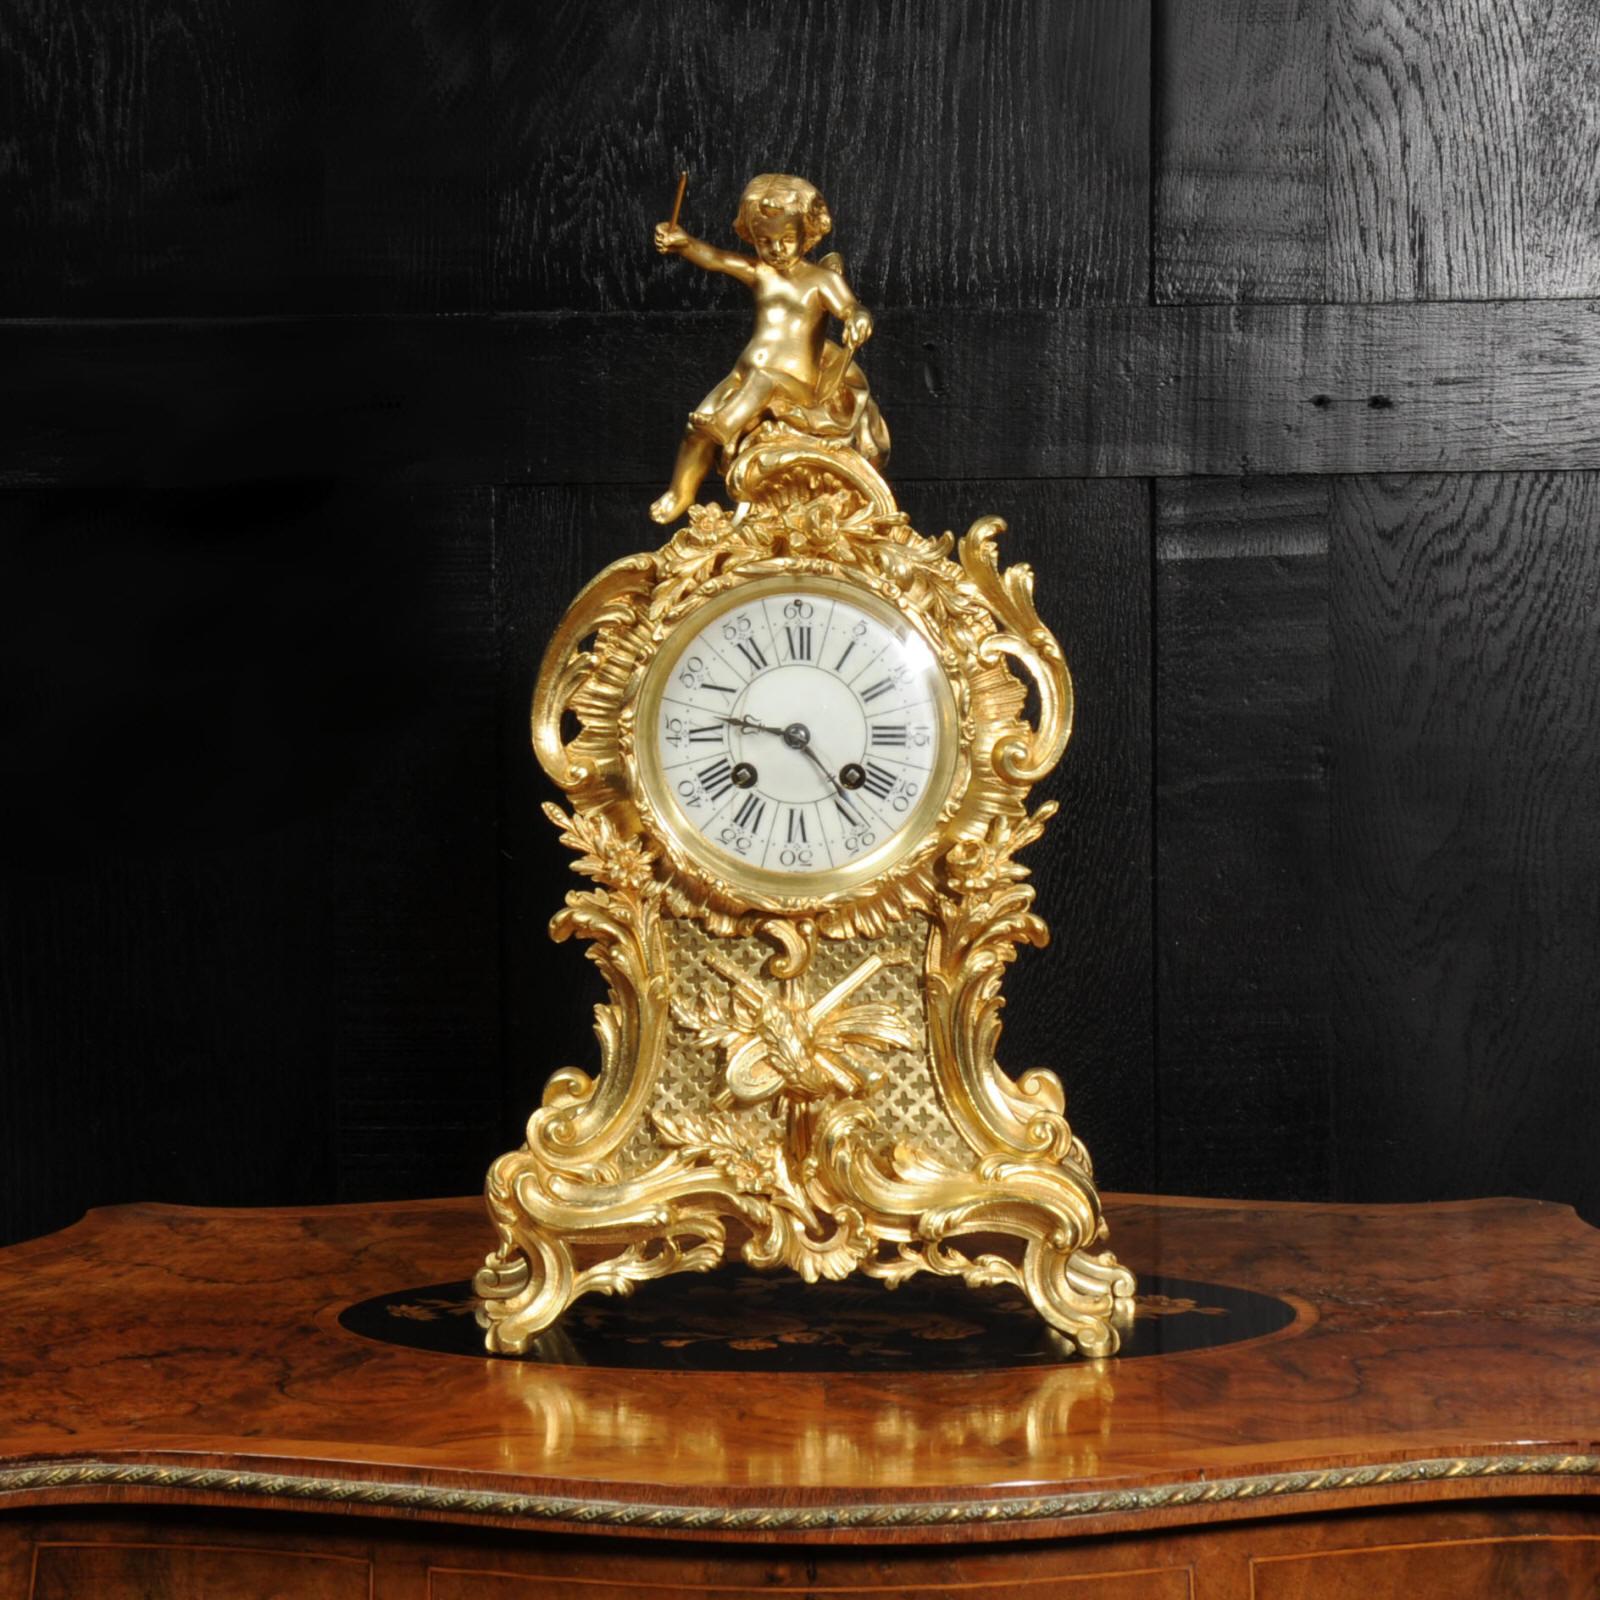 A lovely original antique French Rococo clock by Vincenti et Cie. Flamboyantly modelled in gilded bronze, waisted case with with swirling acanthus, 'c' scrolls and floral swags. To the front is a panel of fret work with a motif of musical